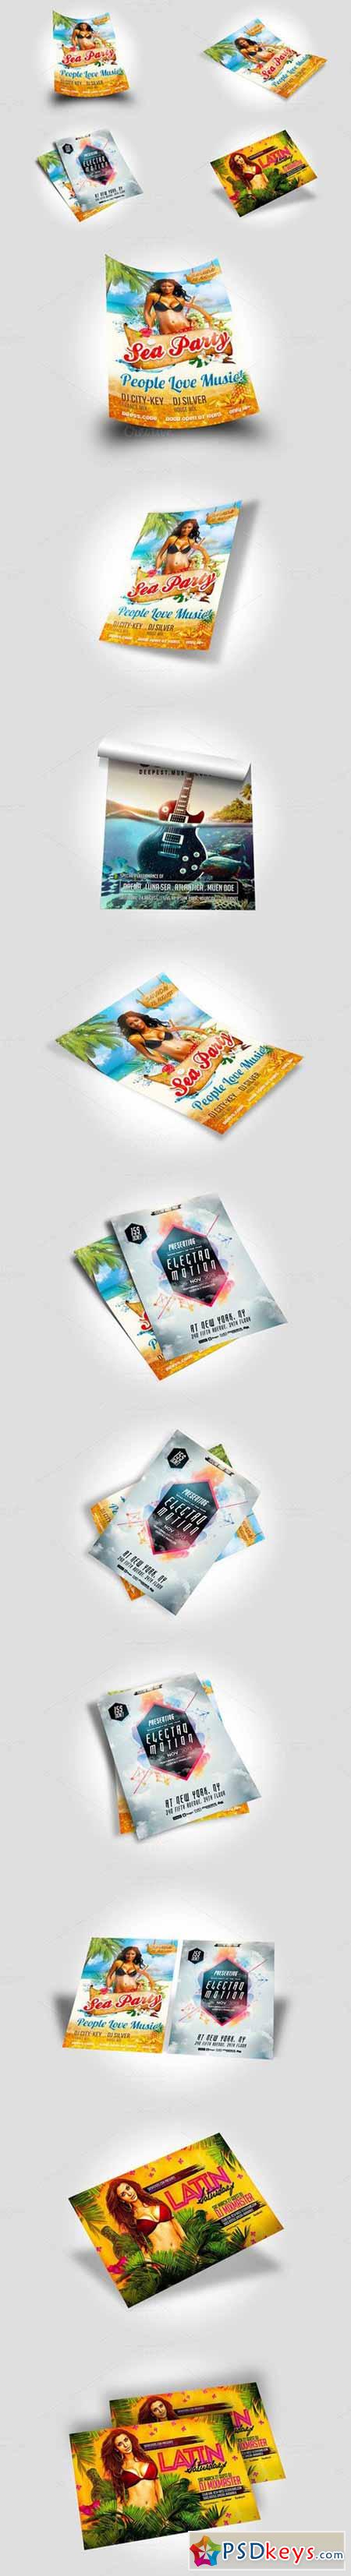 Posters And Flyers - Mockups V02 633889